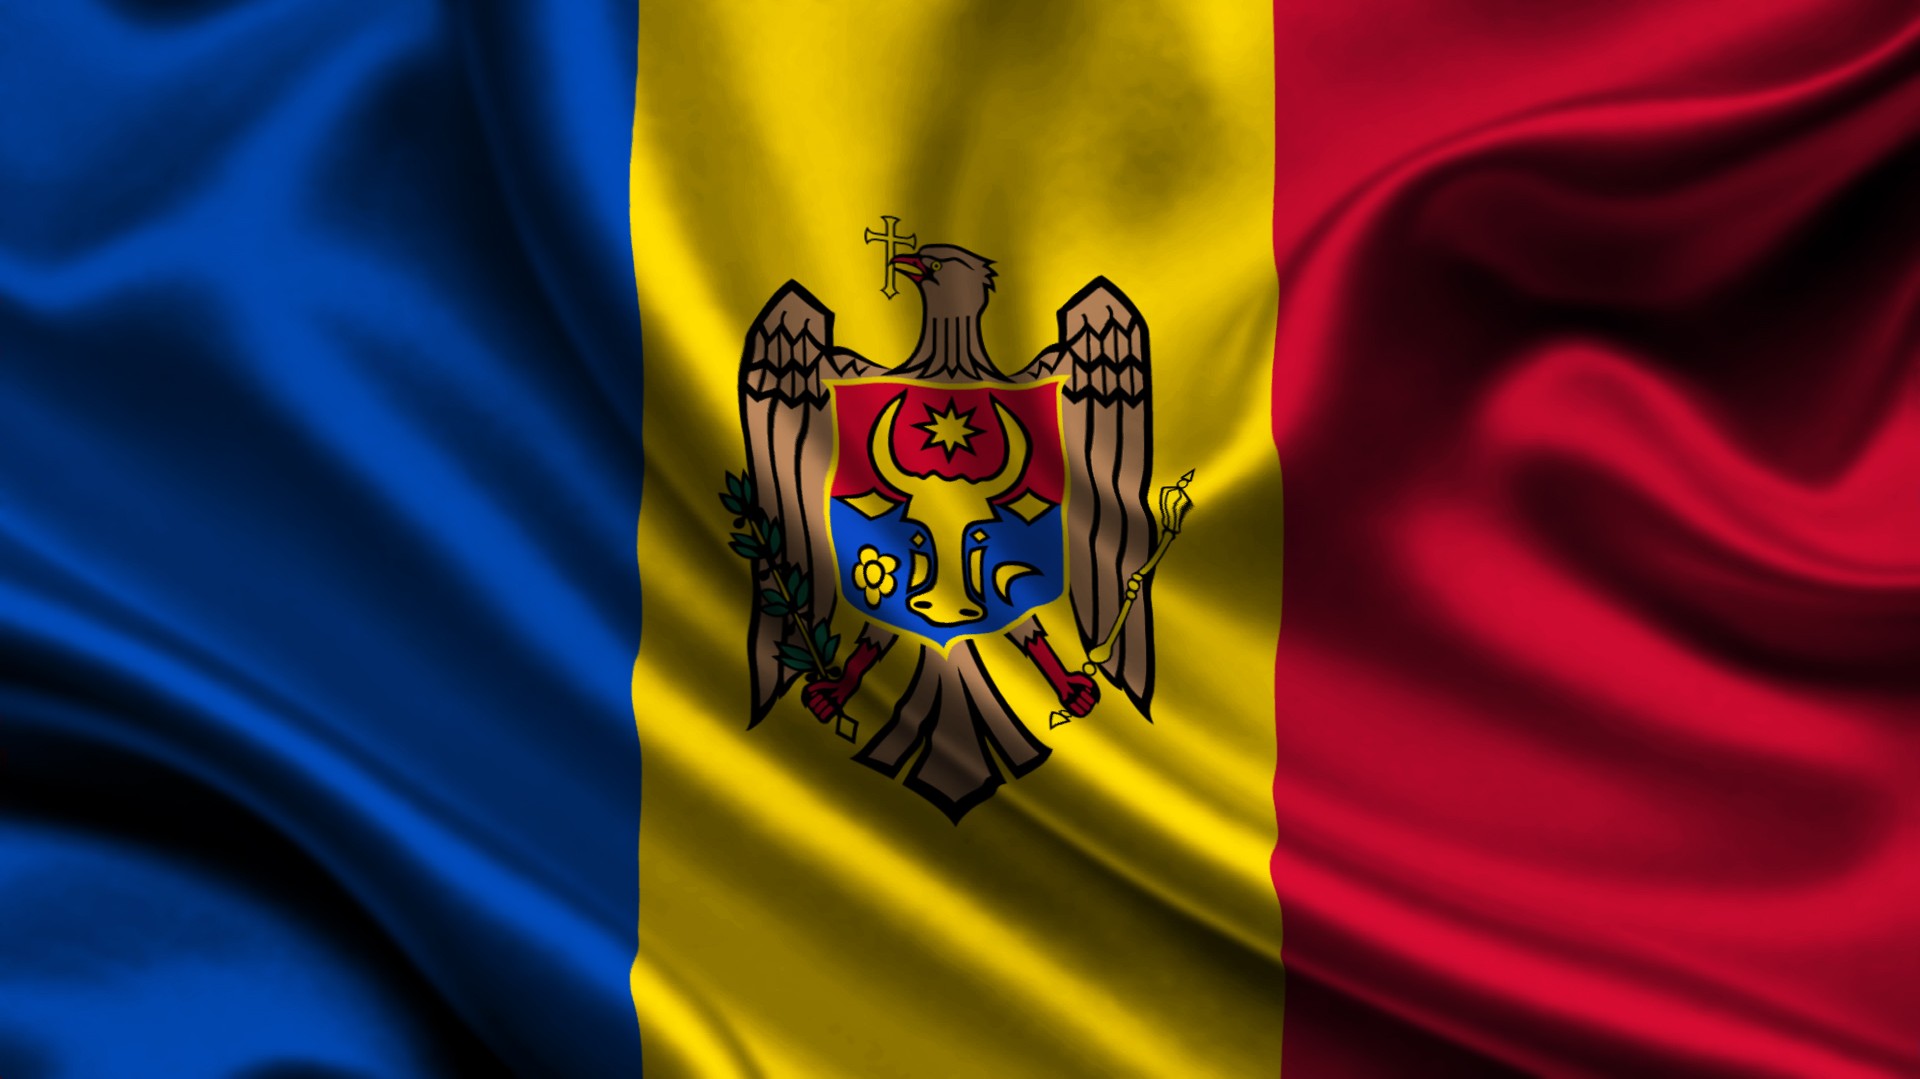 Council of Europe Congress post-monitoring dialogue in the Republic of Moldova